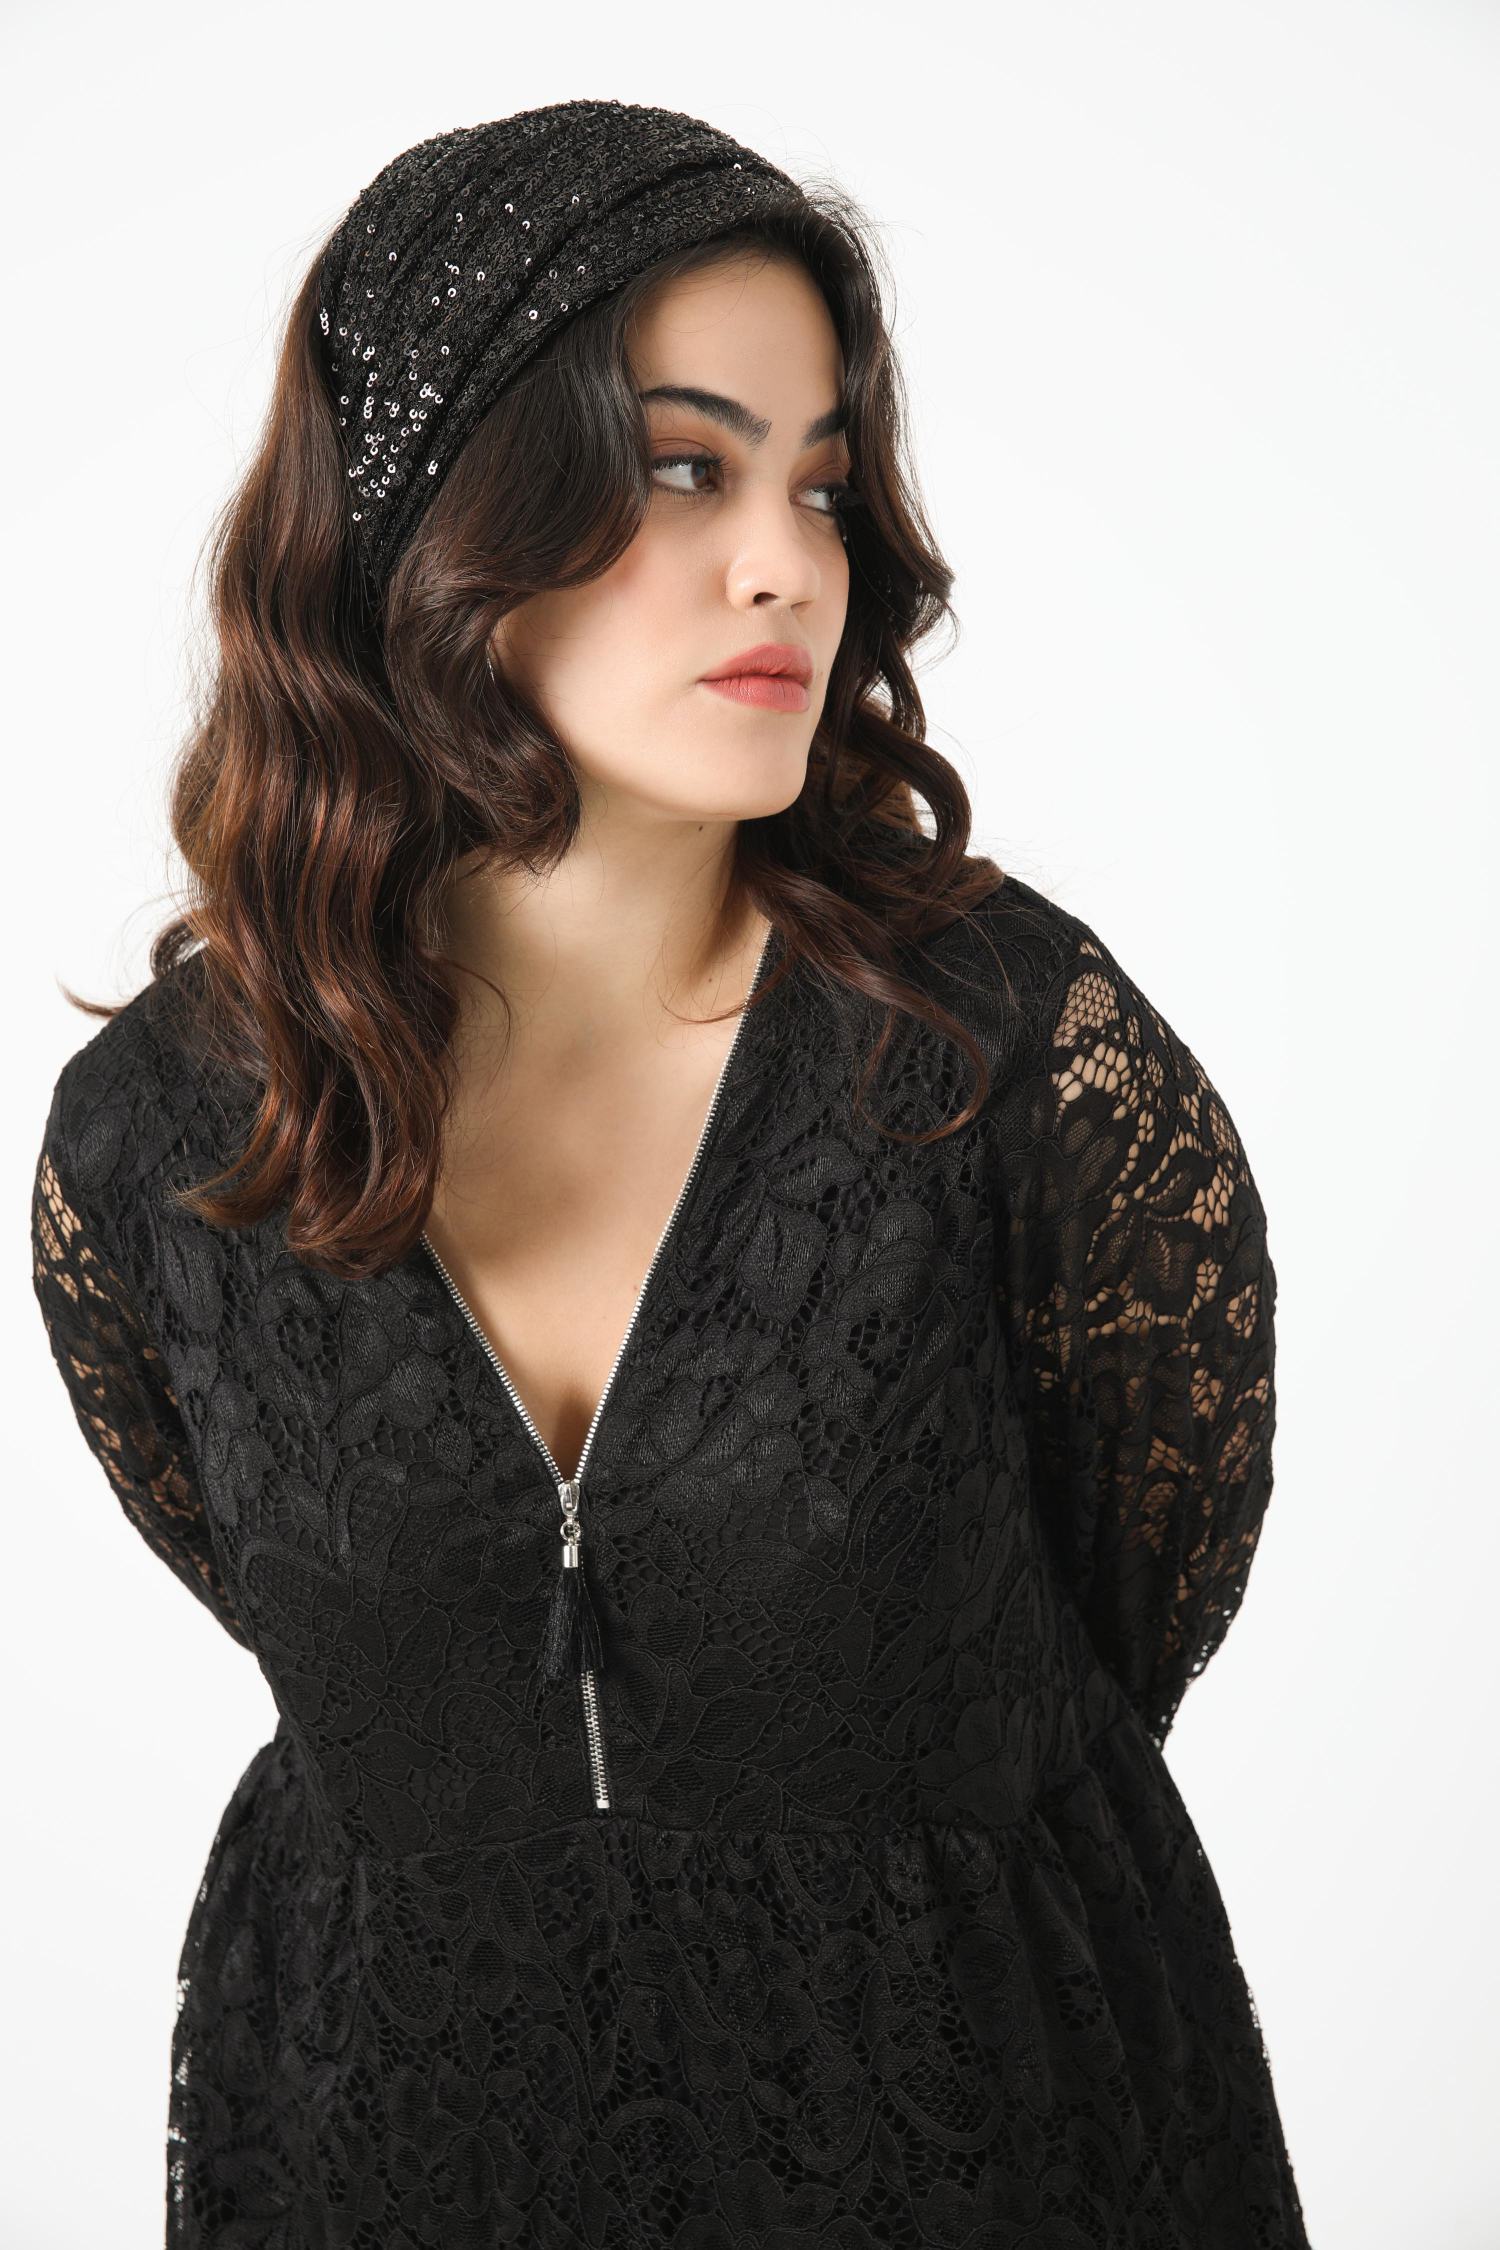 Mid-length lace dress with zip